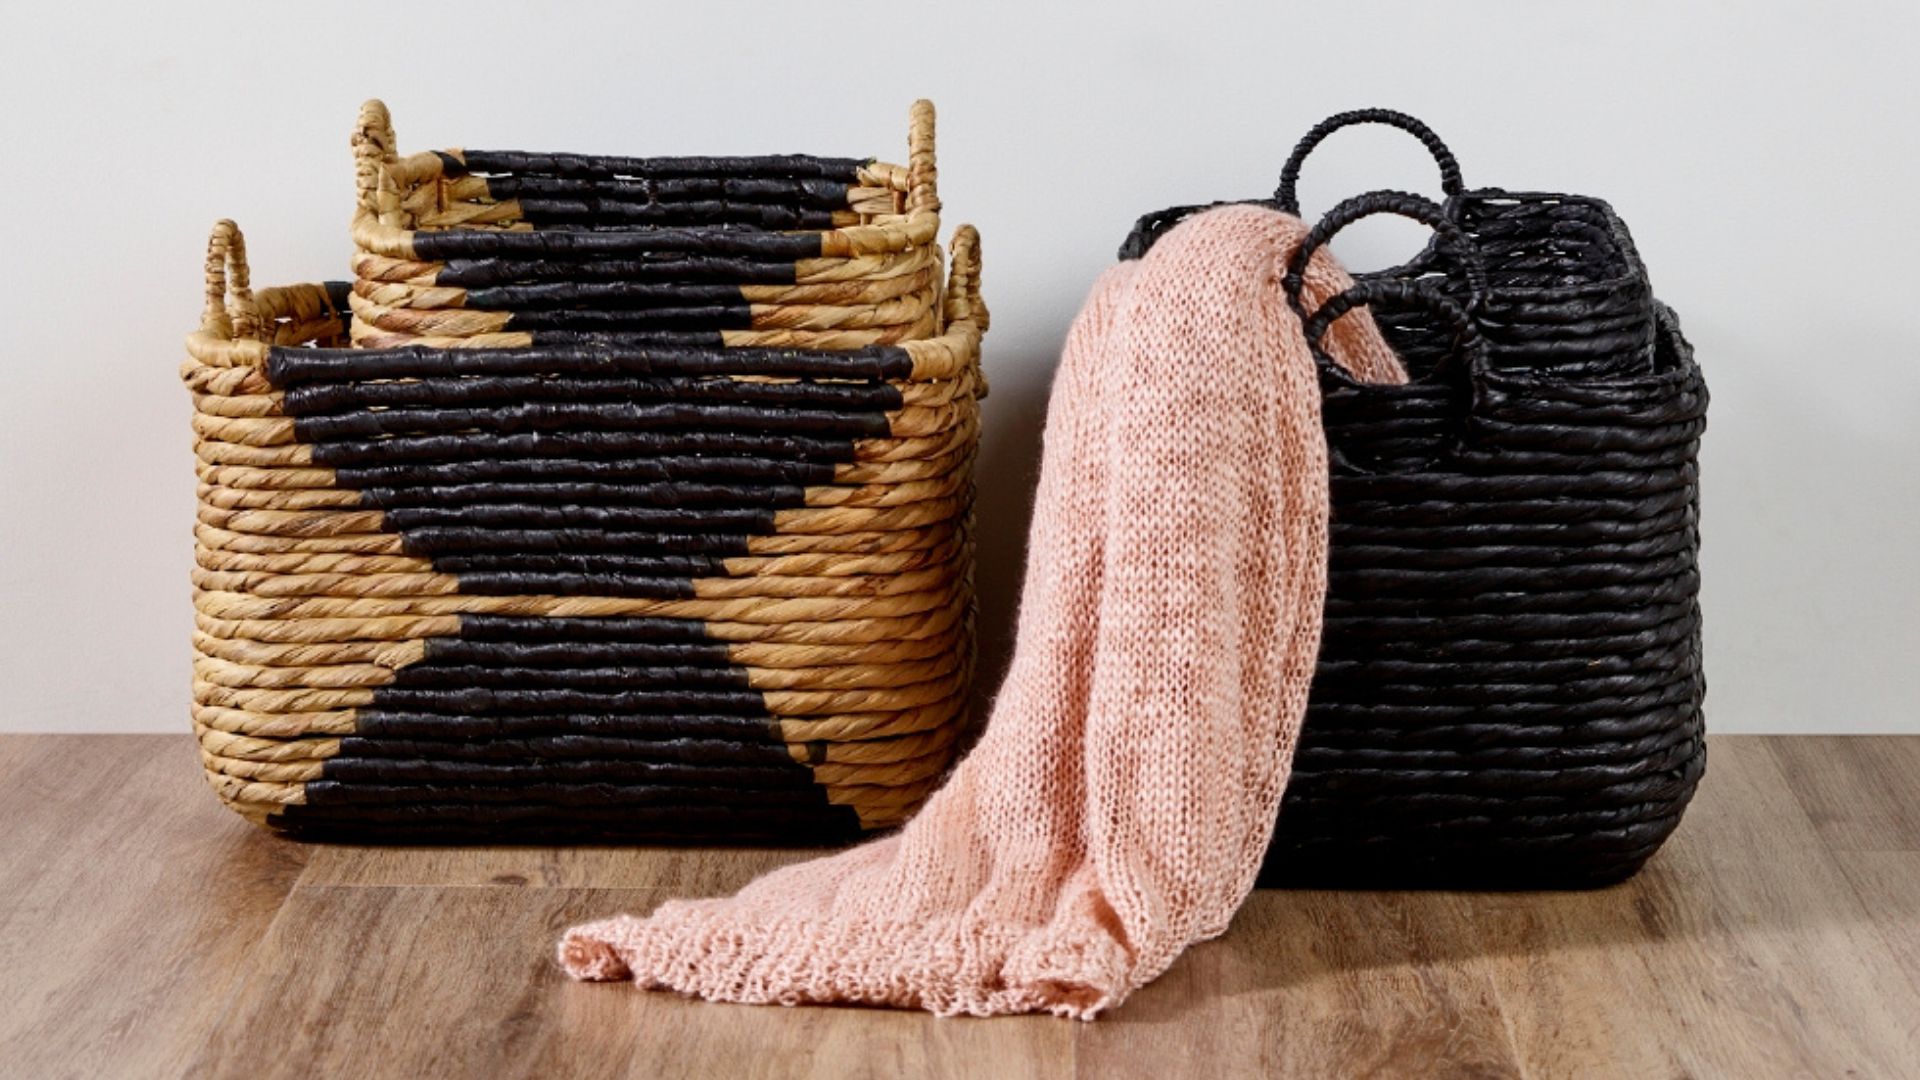 Woven natural baskets with handles